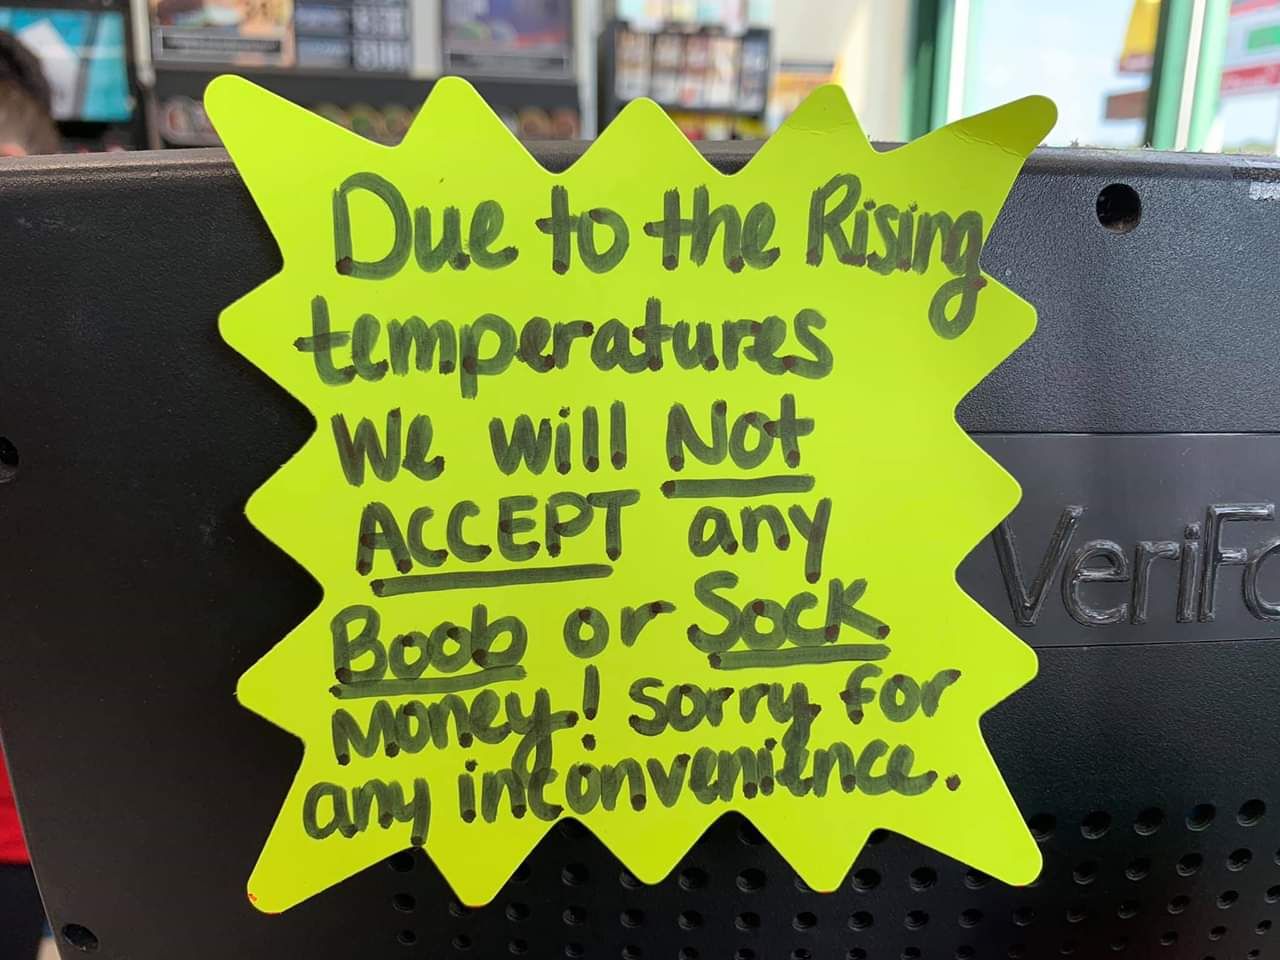 Sign of the day - courtesy of a gas station in Tennessee